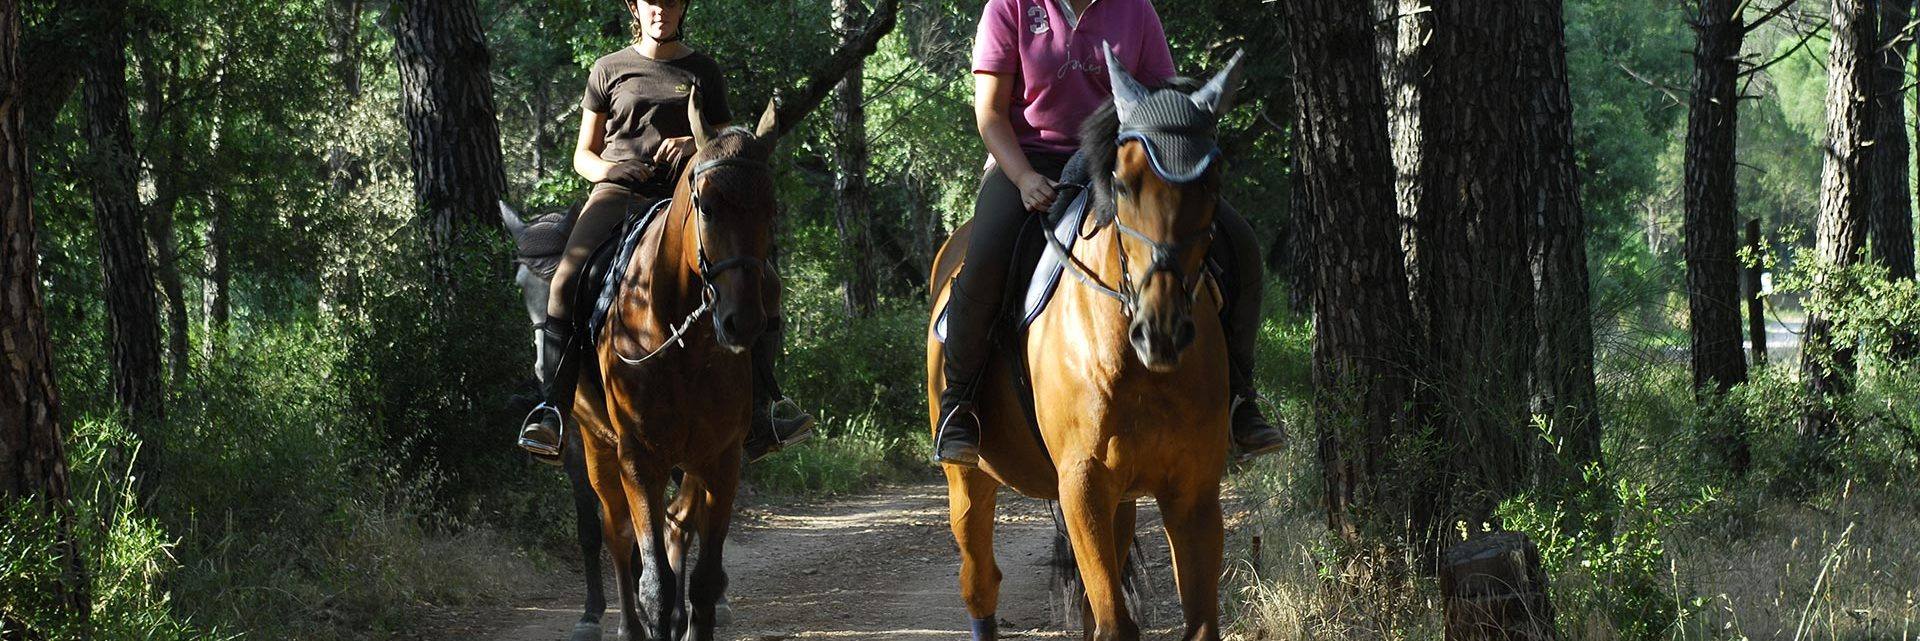 Horse-riding in the Maures Massif